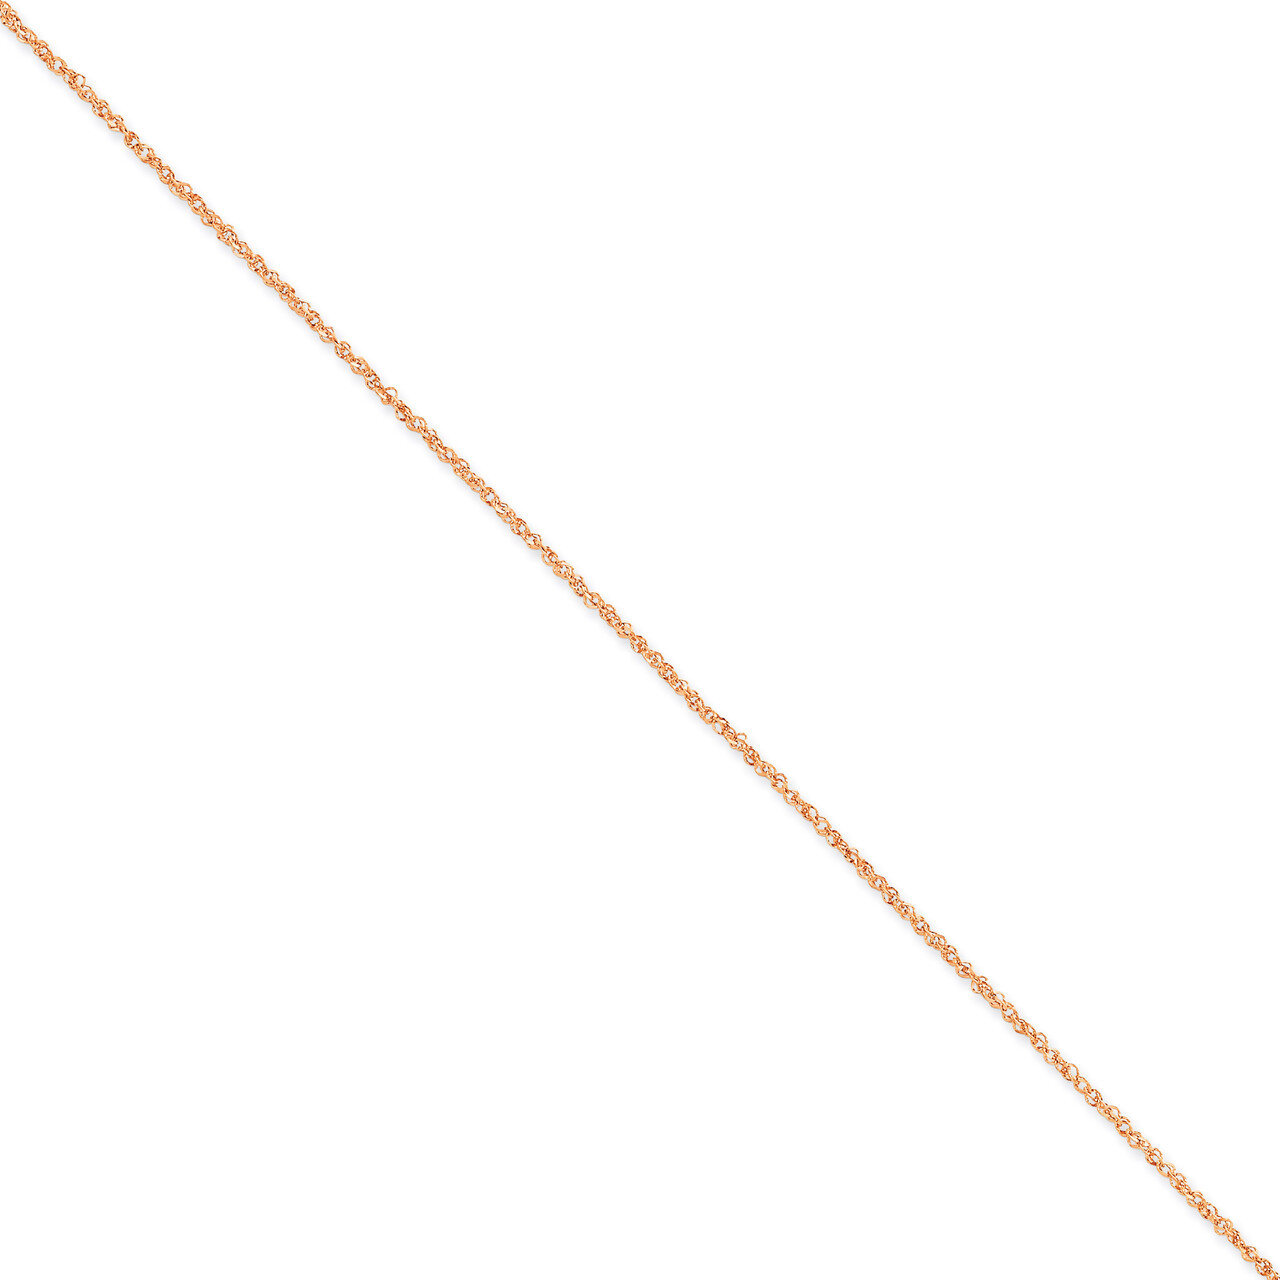 1.7mm Ropa Chain 20 Inch 14k Rose Gold RSC28-20